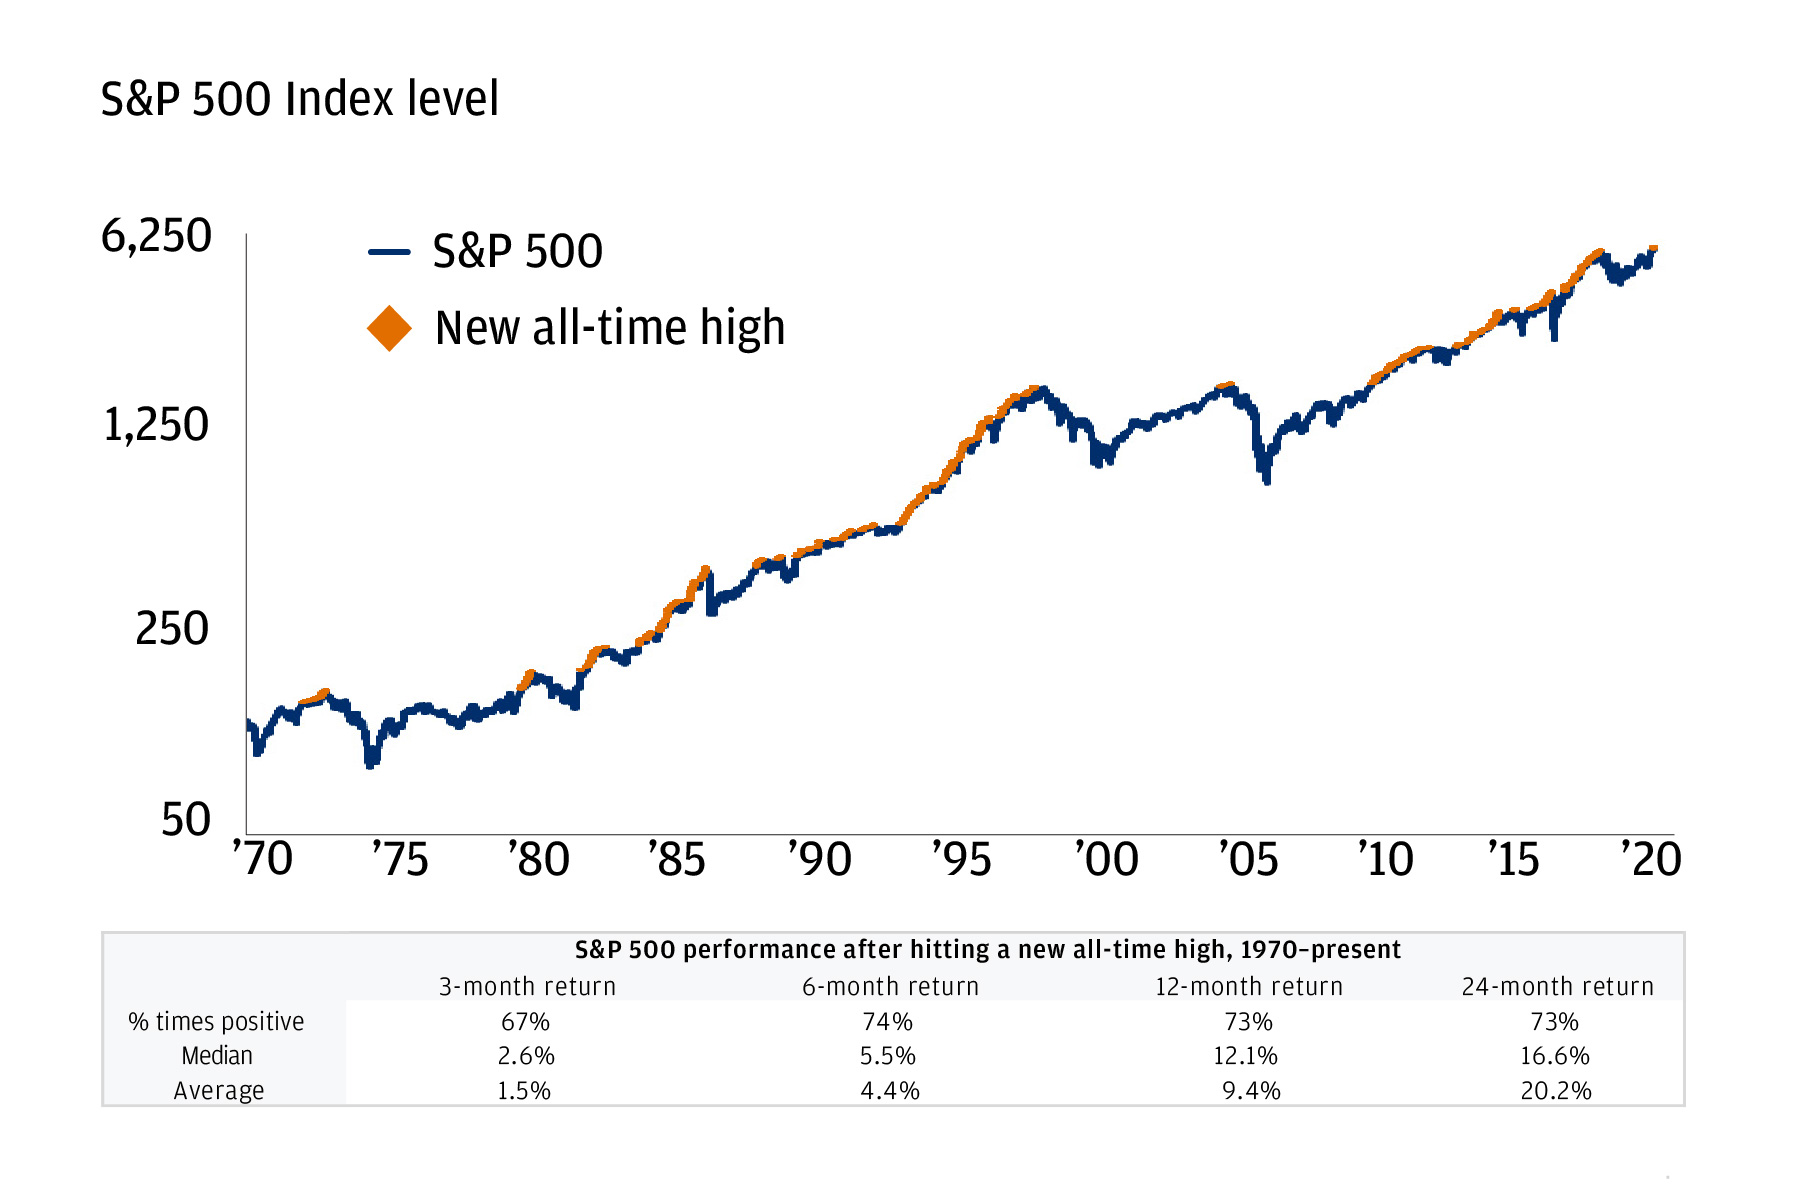 S&P 500 chart - This line chart shows the S&P 500 index level and all-time highs for the years 1970 to 2024, exhibiting how stocks have historically never failed to regain highs. 67% of the time, a 3-month return was positive (median: 2.6%; average: 1.5%). 74% of the time, a 6-month return was positive (median: 5.5%; average: 4.4%). 73% of the time, a 12-month return was positive (median: 12.1%; average: 9.4%). 73% of the time, a 24-month return was positive (median: 16.6%; average: 20.2%).